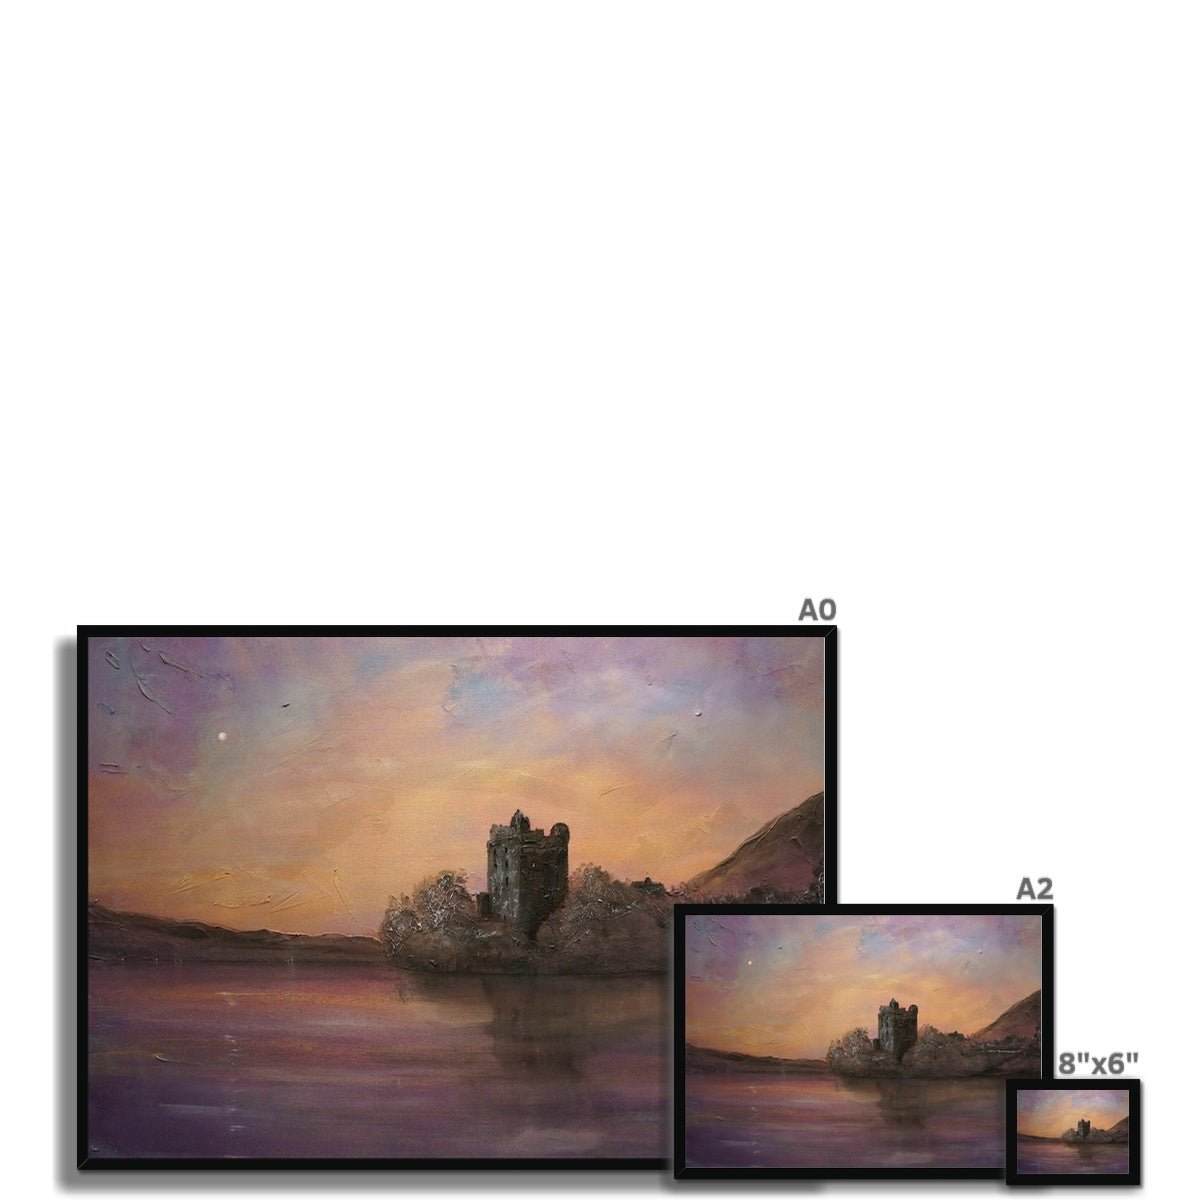 Urquhart Castle Moonlight Painting | Framed Prints From Scotland-Framed Prints-Historic & Iconic Scotland Art Gallery-Paintings, Prints, Homeware, Art Gifts From Scotland By Scottish Artist Kevin Hunter